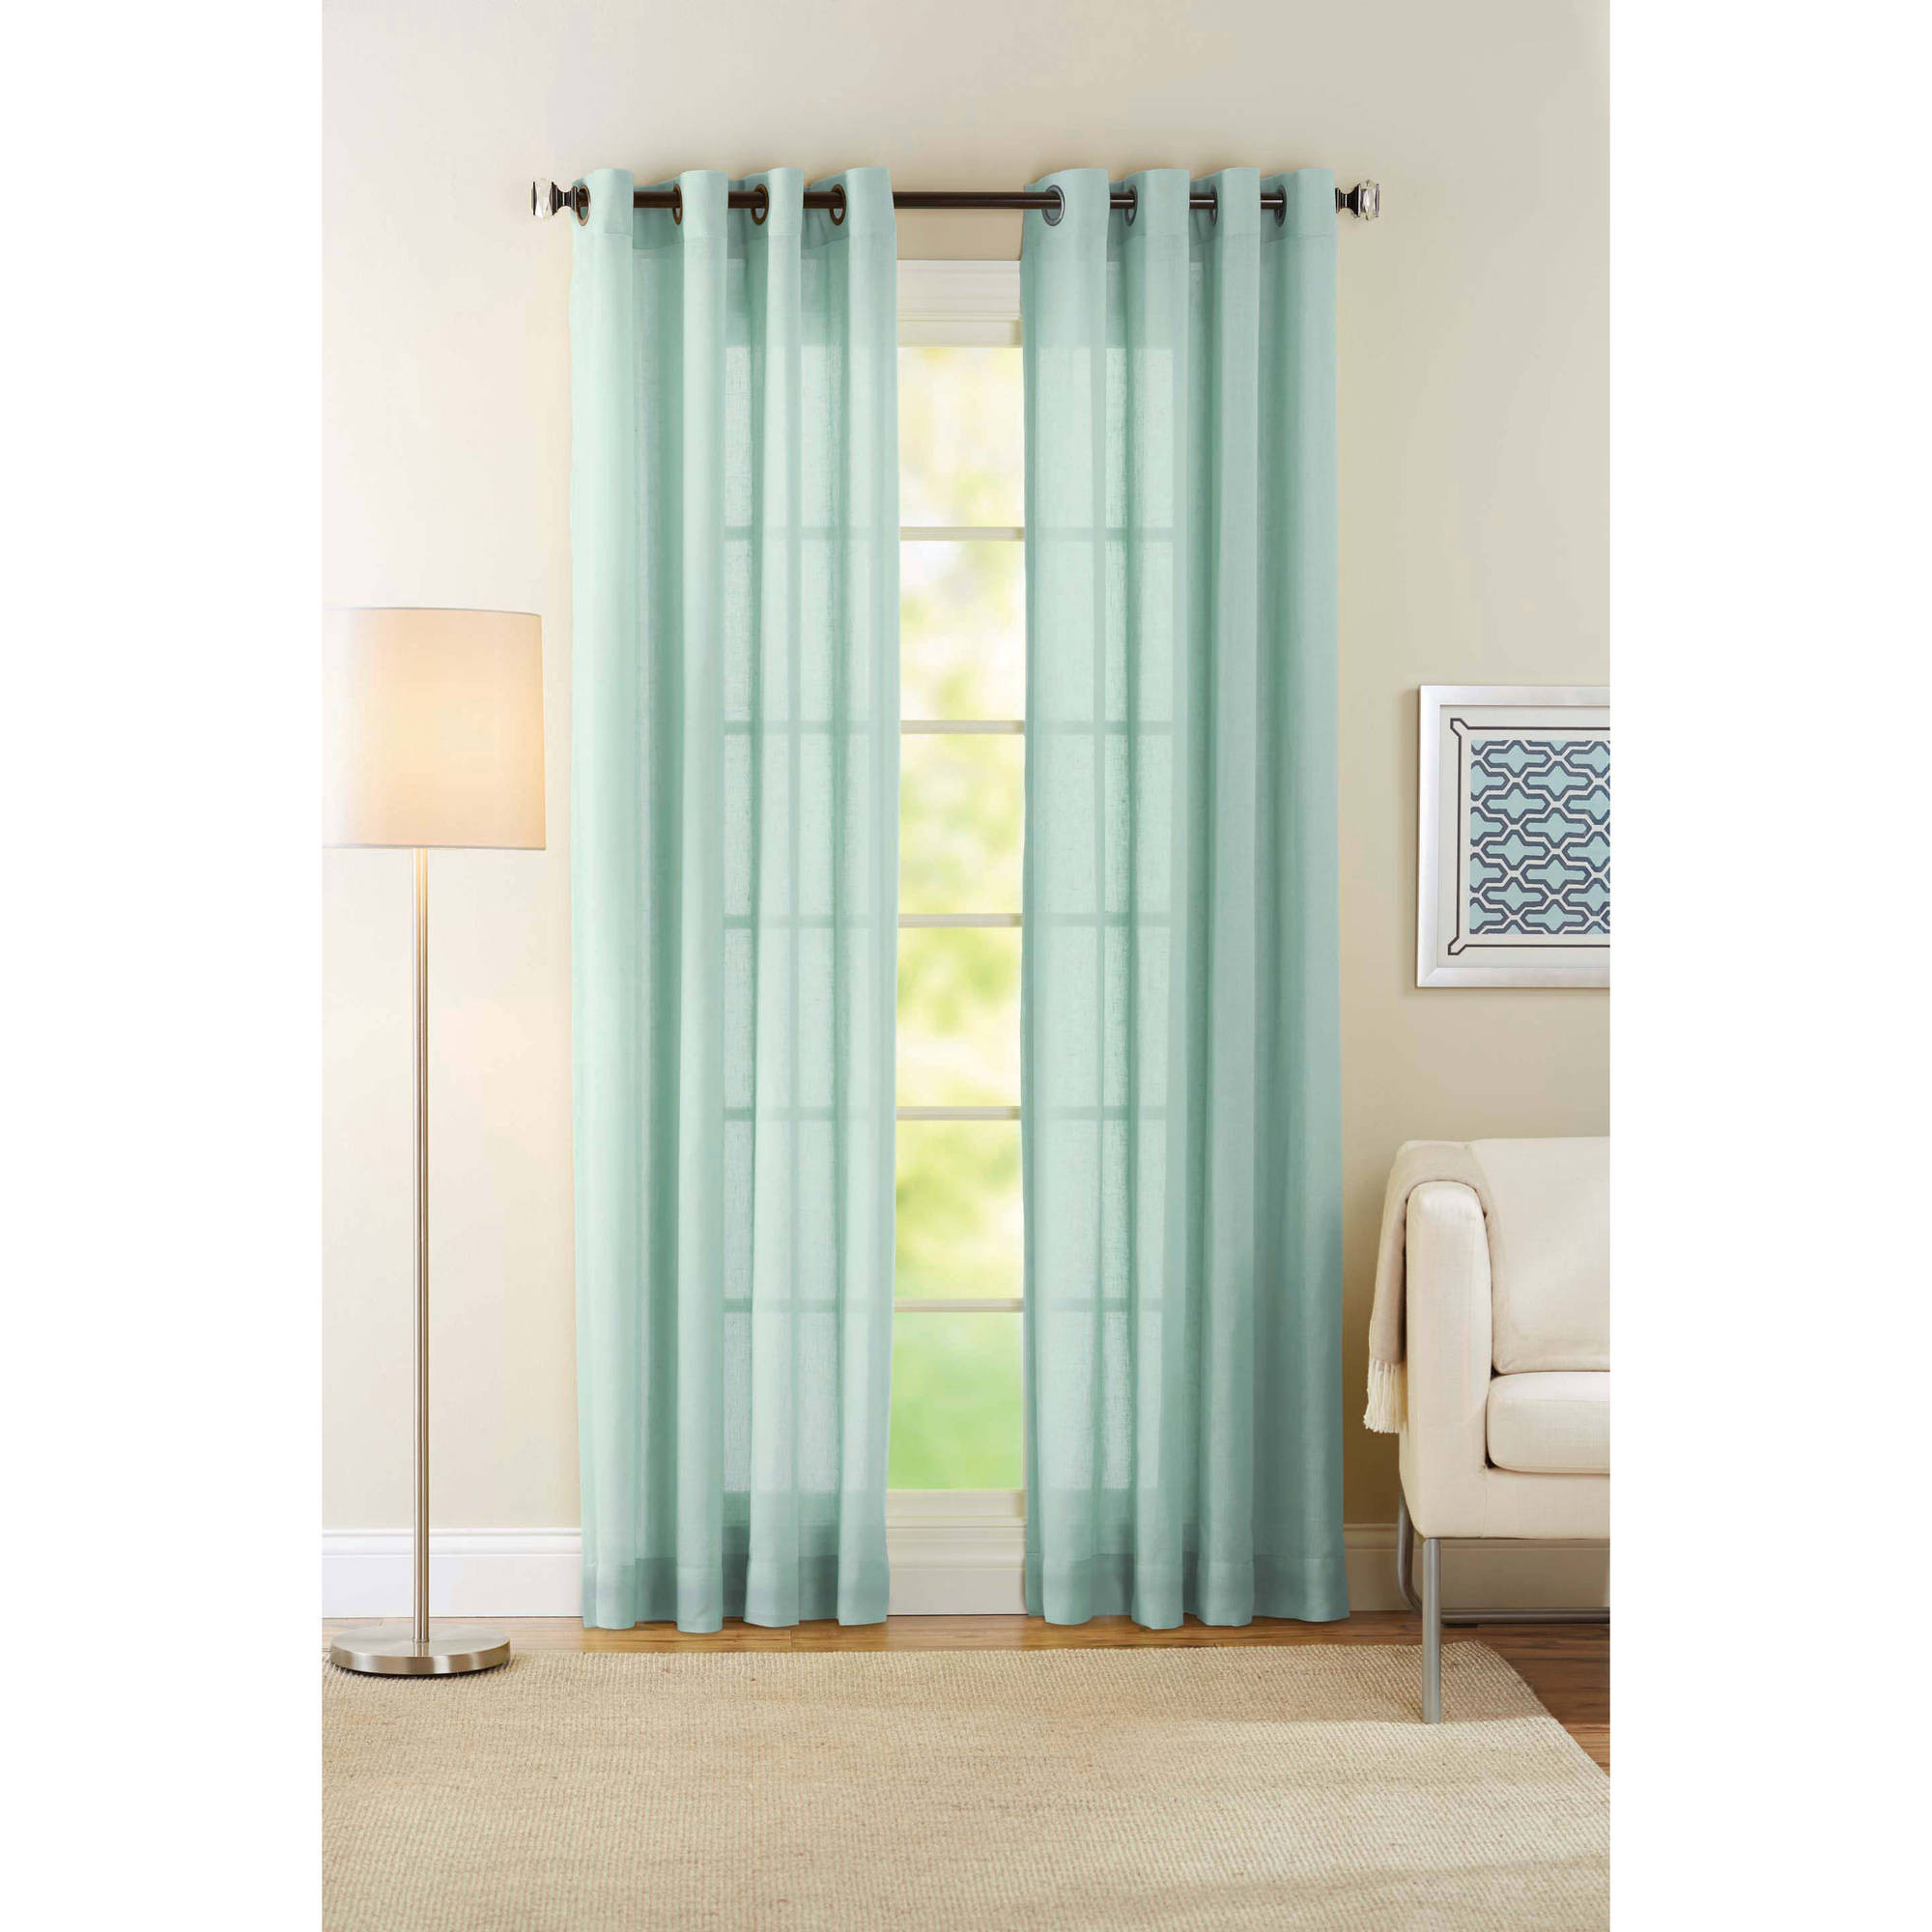 Walmart Curtains For Living Room
 Curtain Add Fresh Style And Color To Your Home With